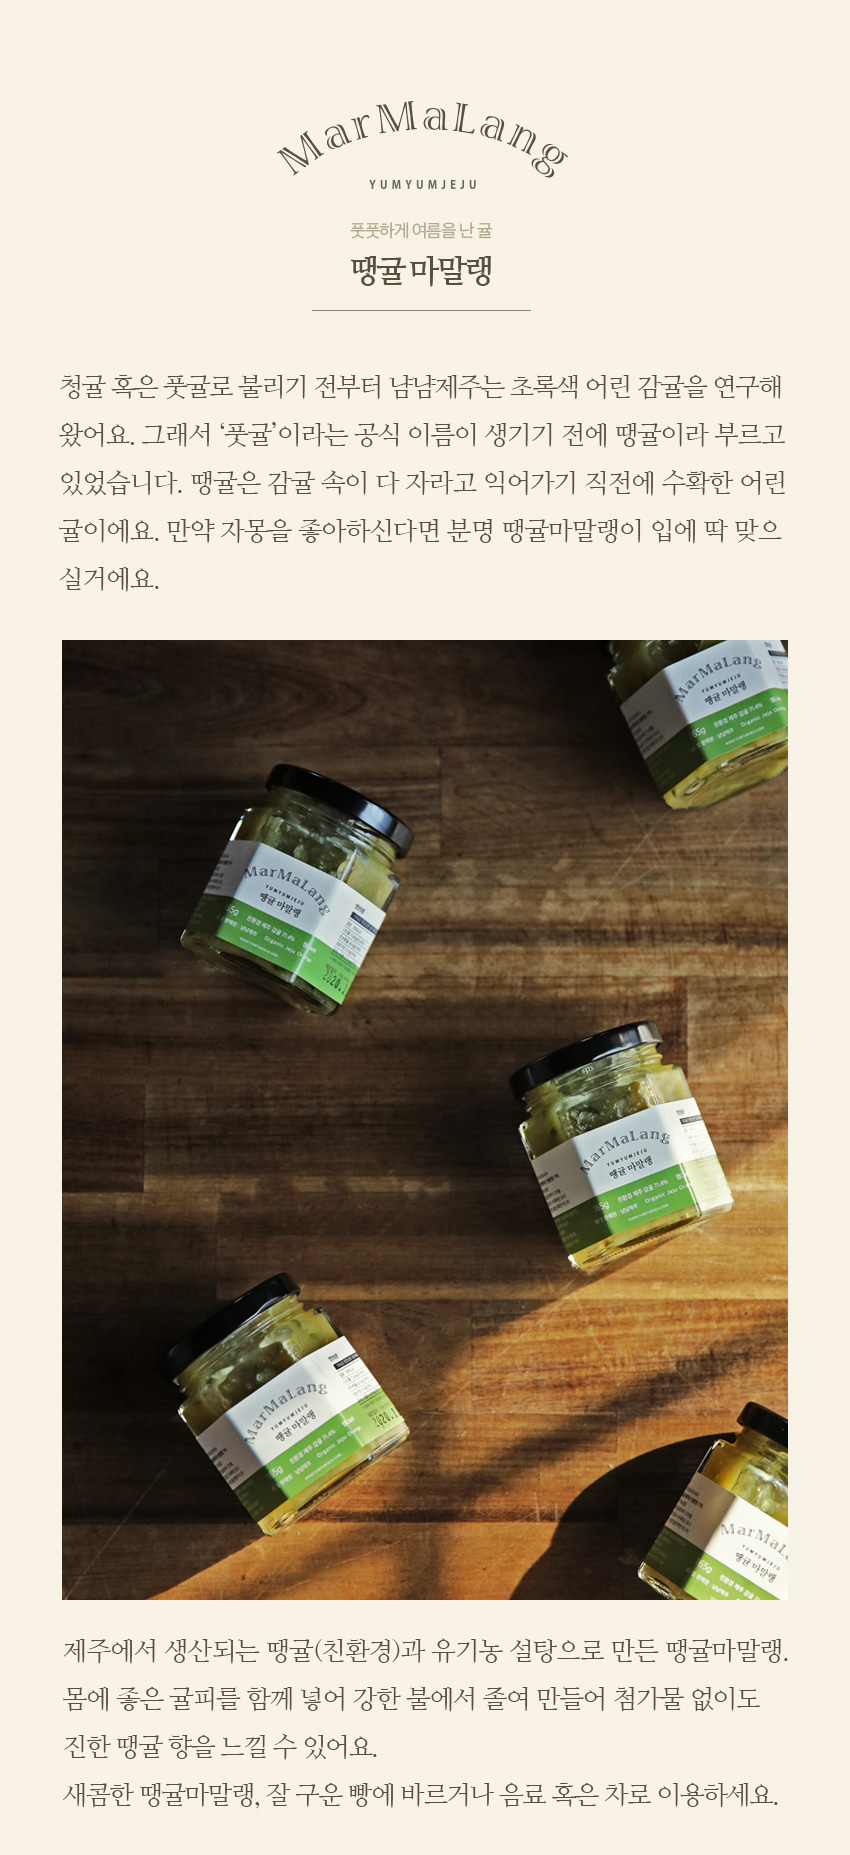 How dose YumYum Jeju Marmalang differ from others? We use primary products supplied from local farms, and they are mostly organic.  All recipes are authentic. Jams are low (organic) sugar and contain no preservatives and additives.We do not squash fresh fruits, because chopped ones give a rich creamy texture like that of fruit butter.